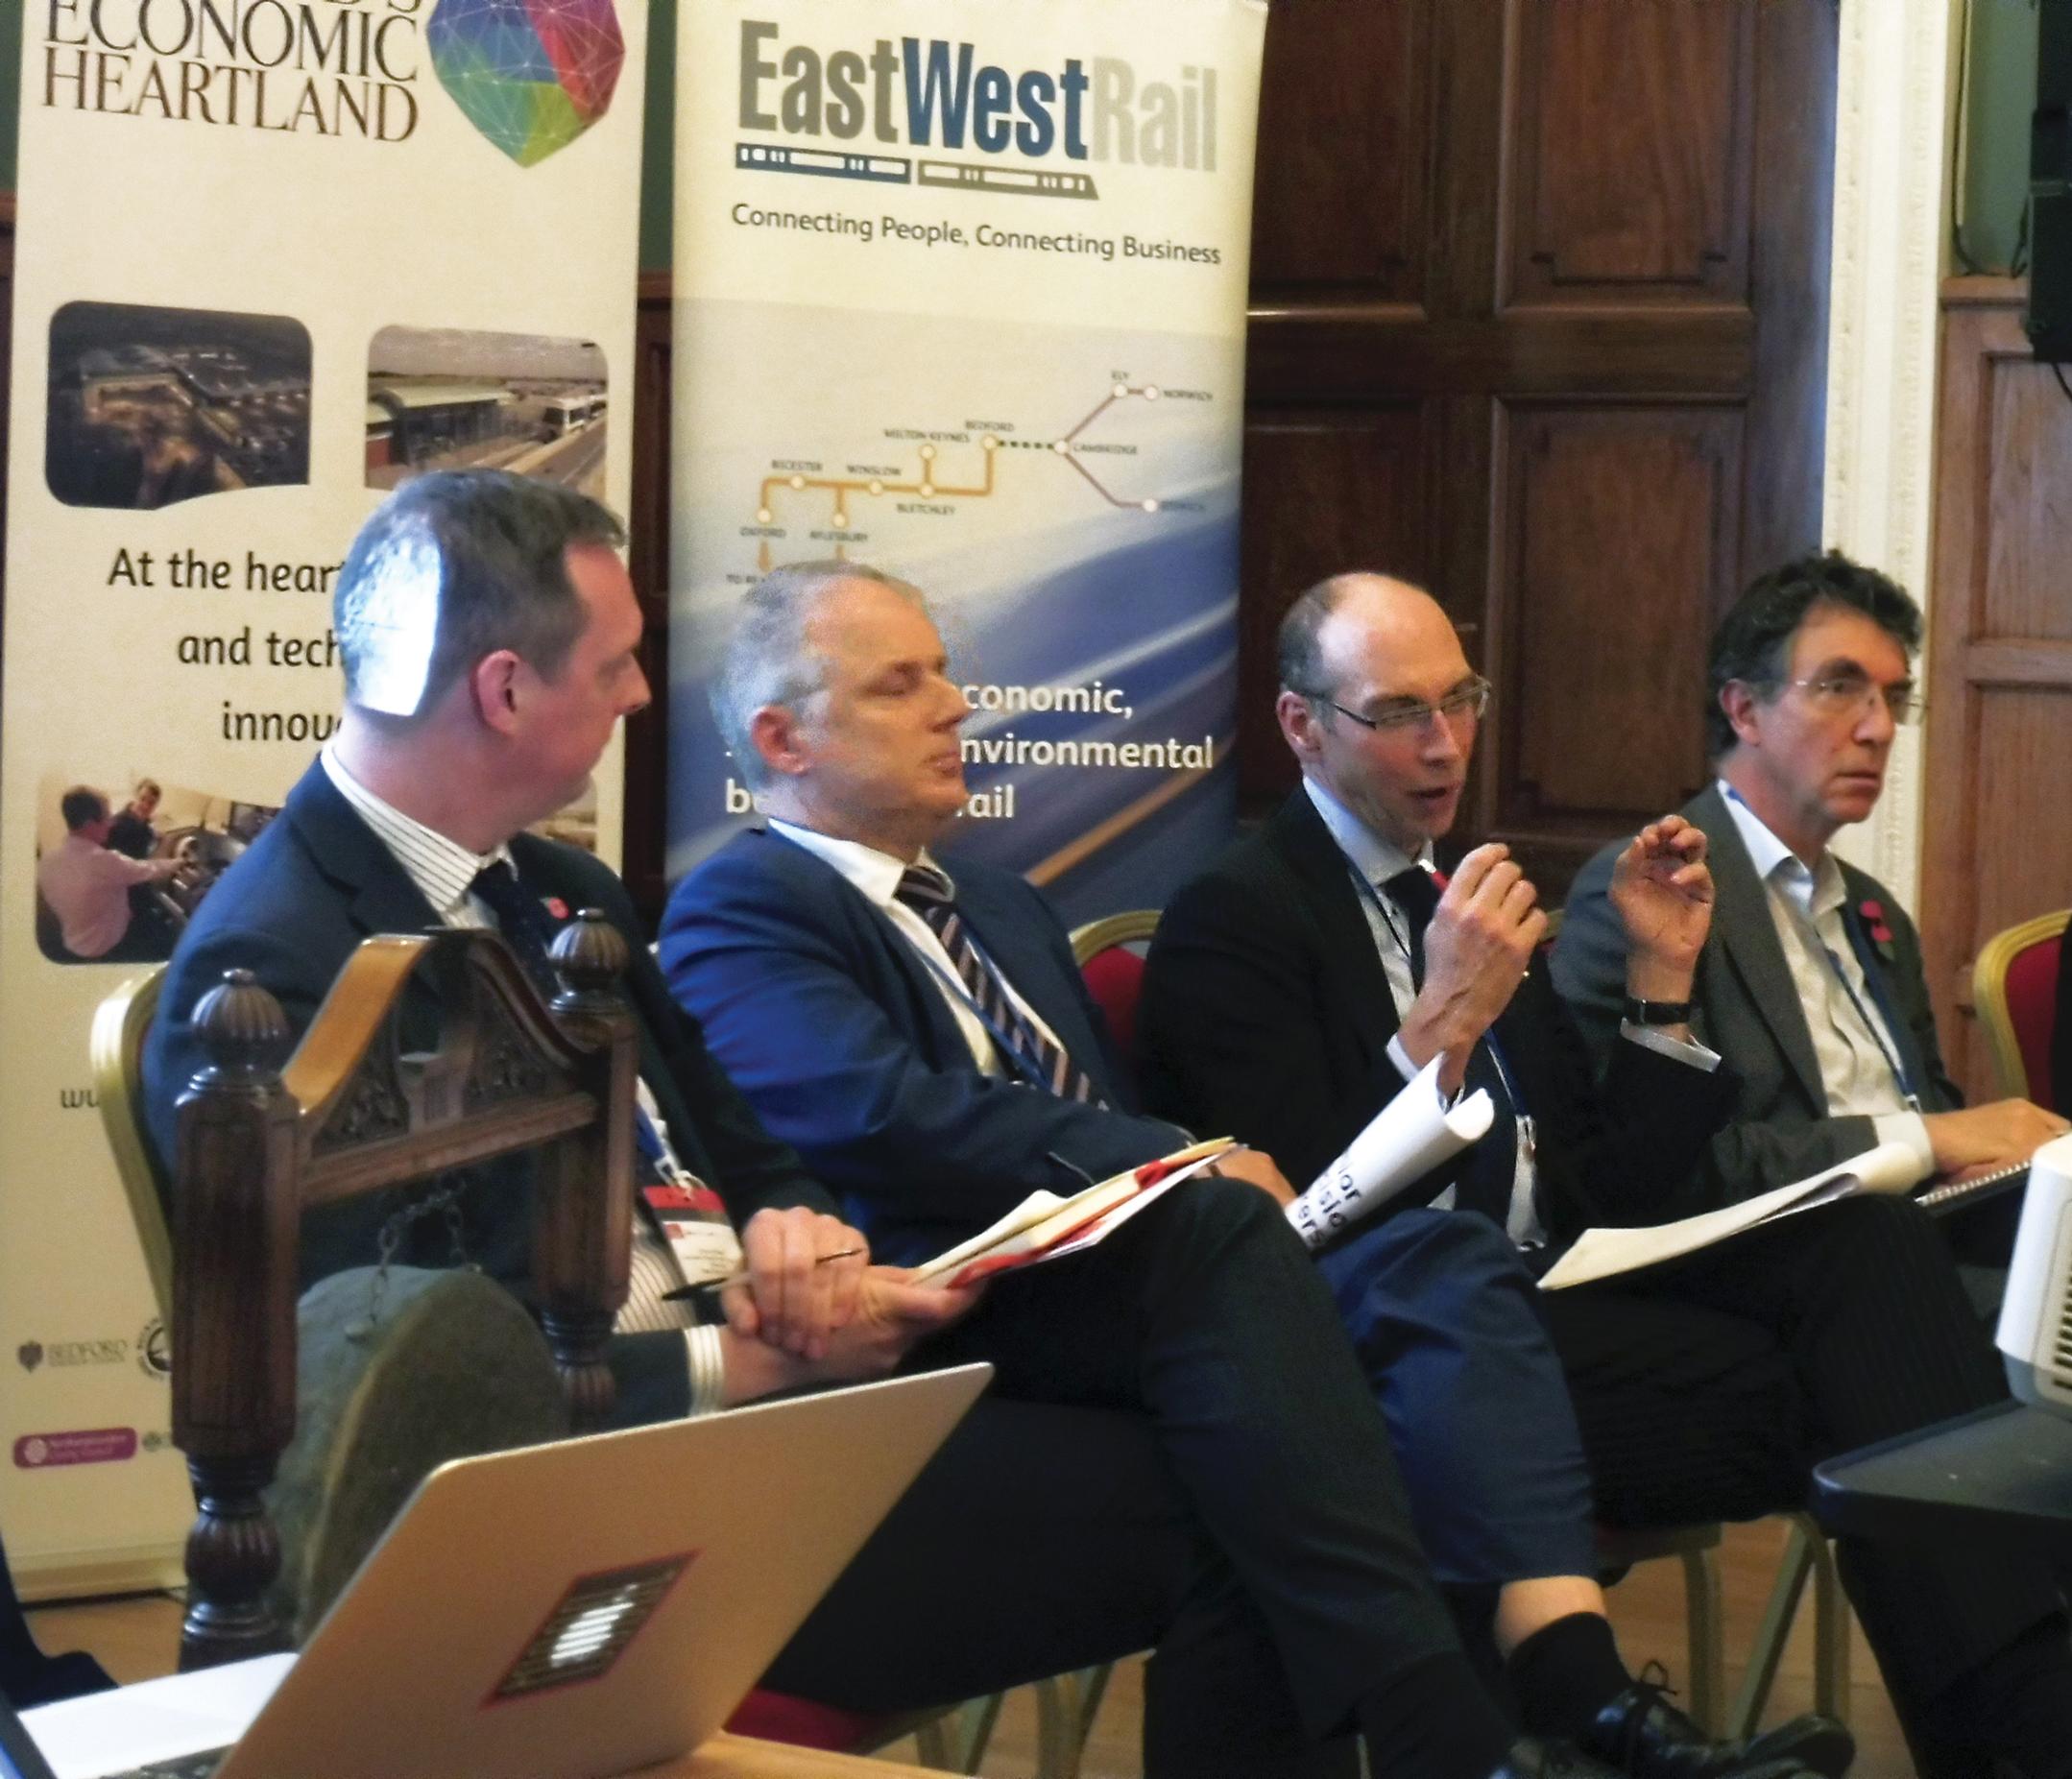 DfT’s Martin Capstick led a panel discussion with SDG’s Stephen Bishop, UTG’s Jonathan Bray and CBT’s Stephen Joseph